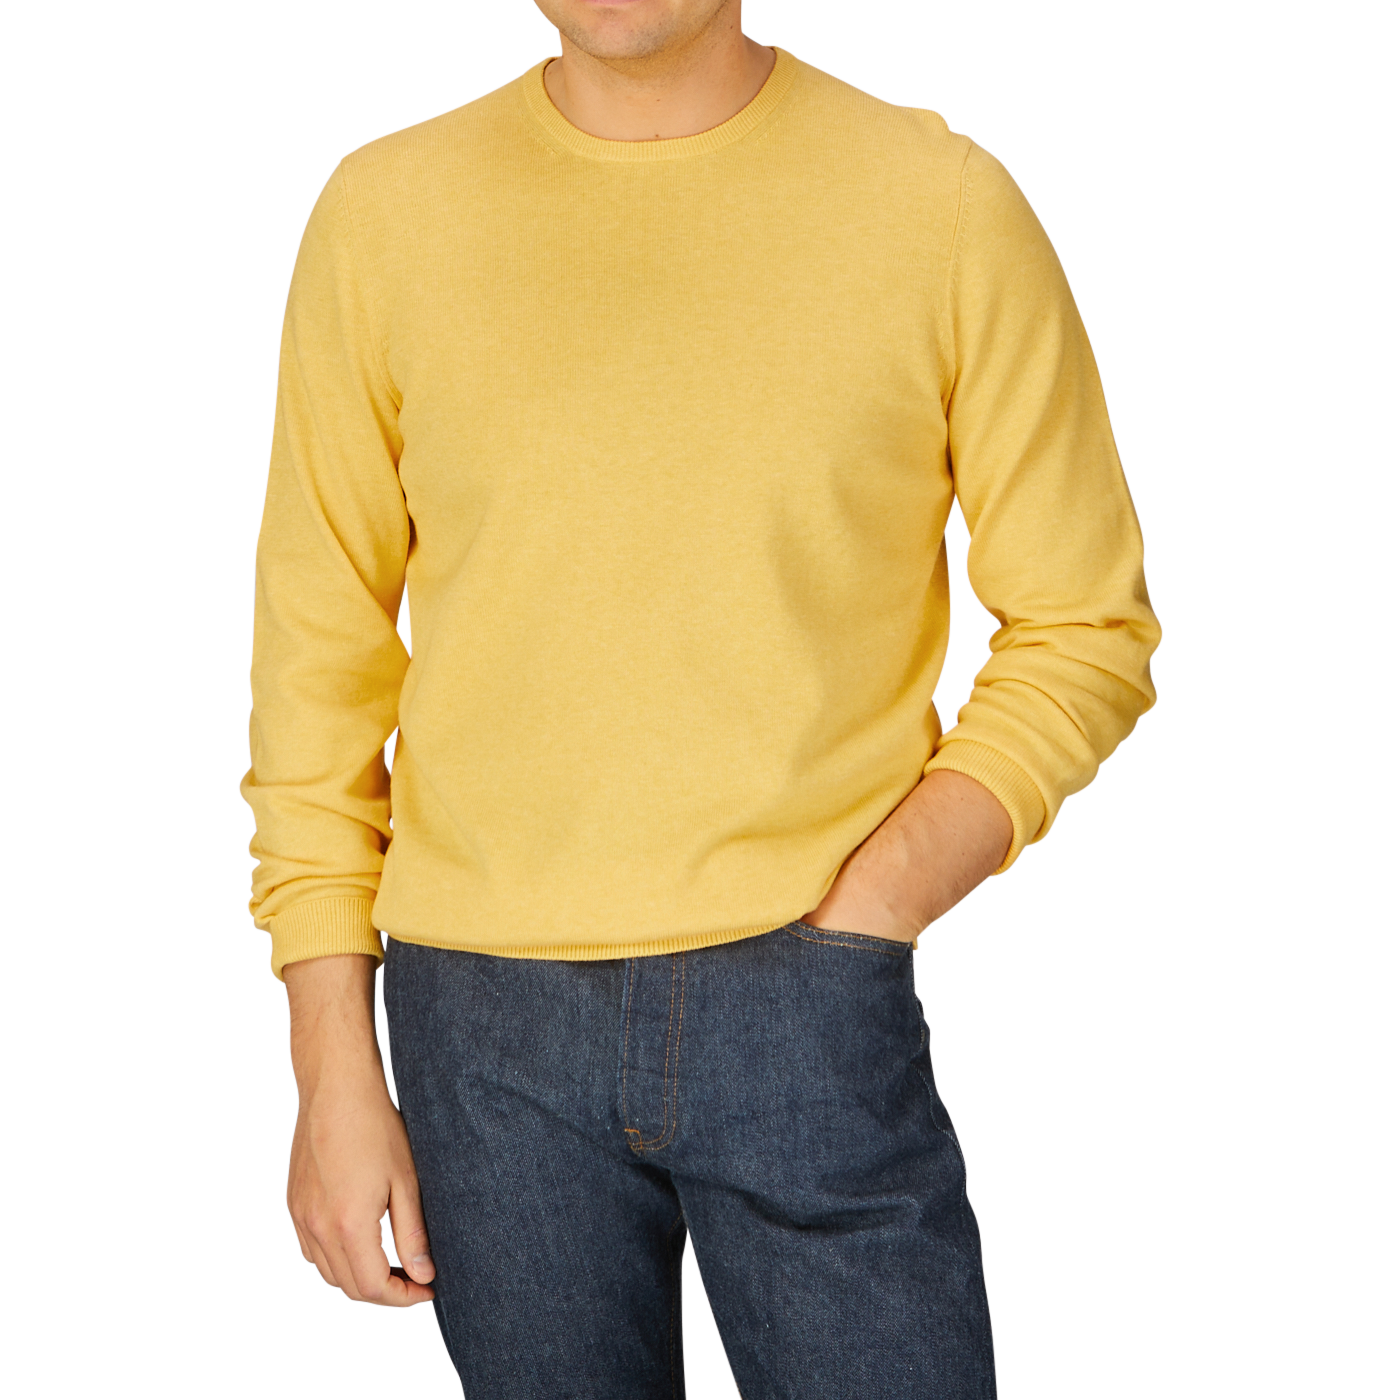 Man wearing a luxury cotton corn yellow Alan Paine crewneck sweater and blue jeans.